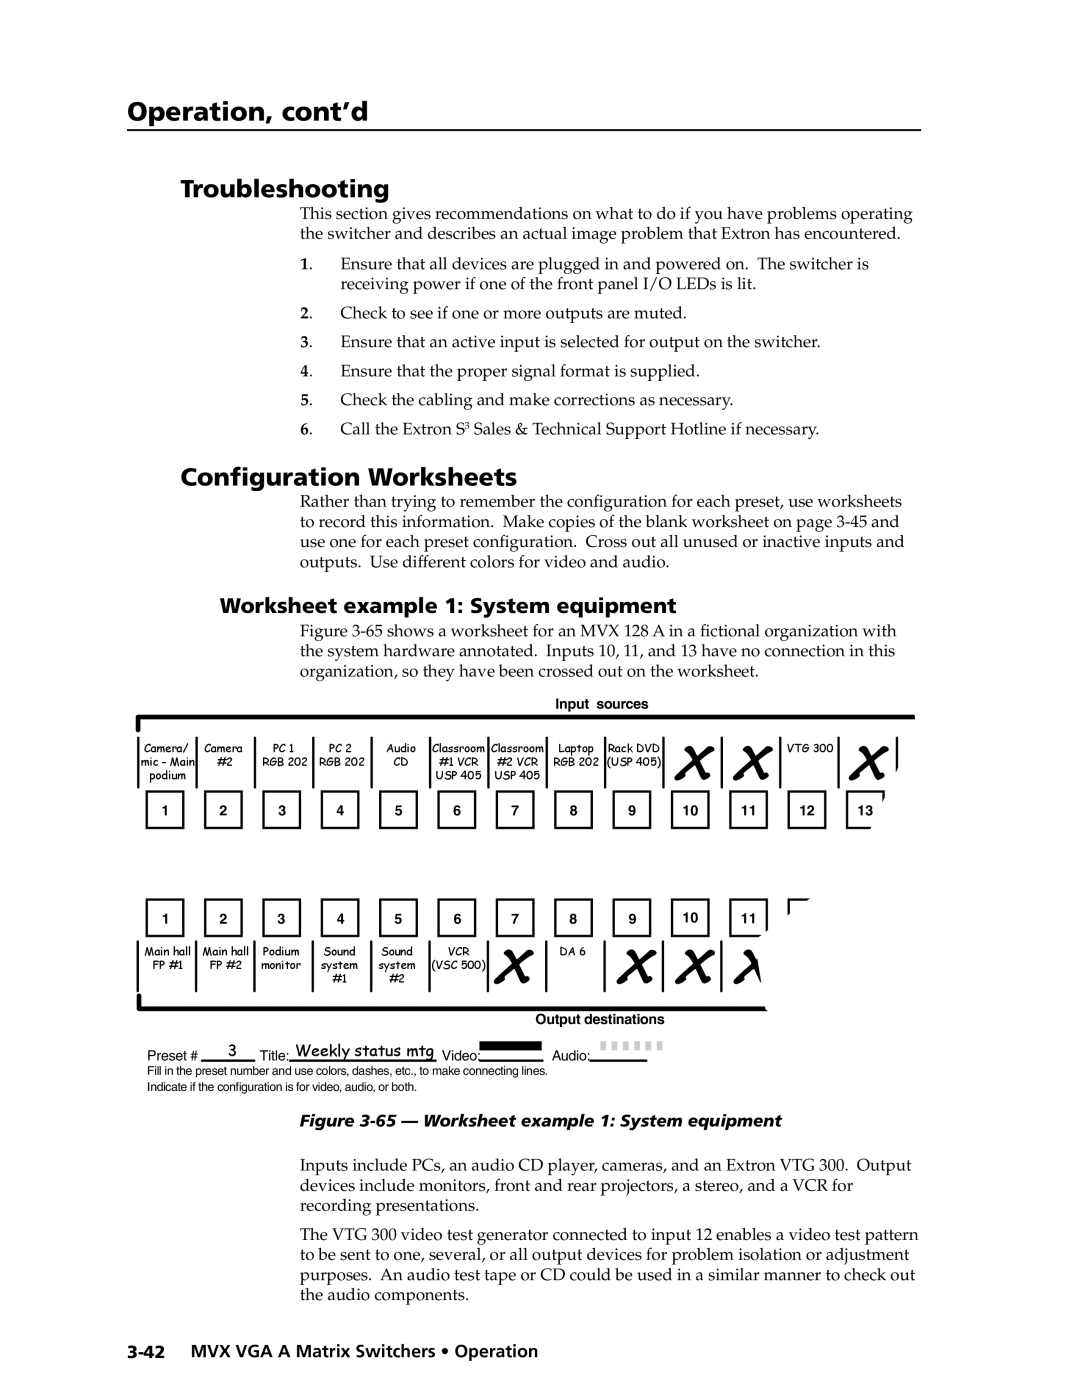 Extron electronic MVX VGA A Troubleshooting, Configuration Worksheets, Worksheet example 1 System equipment, Preliminary 